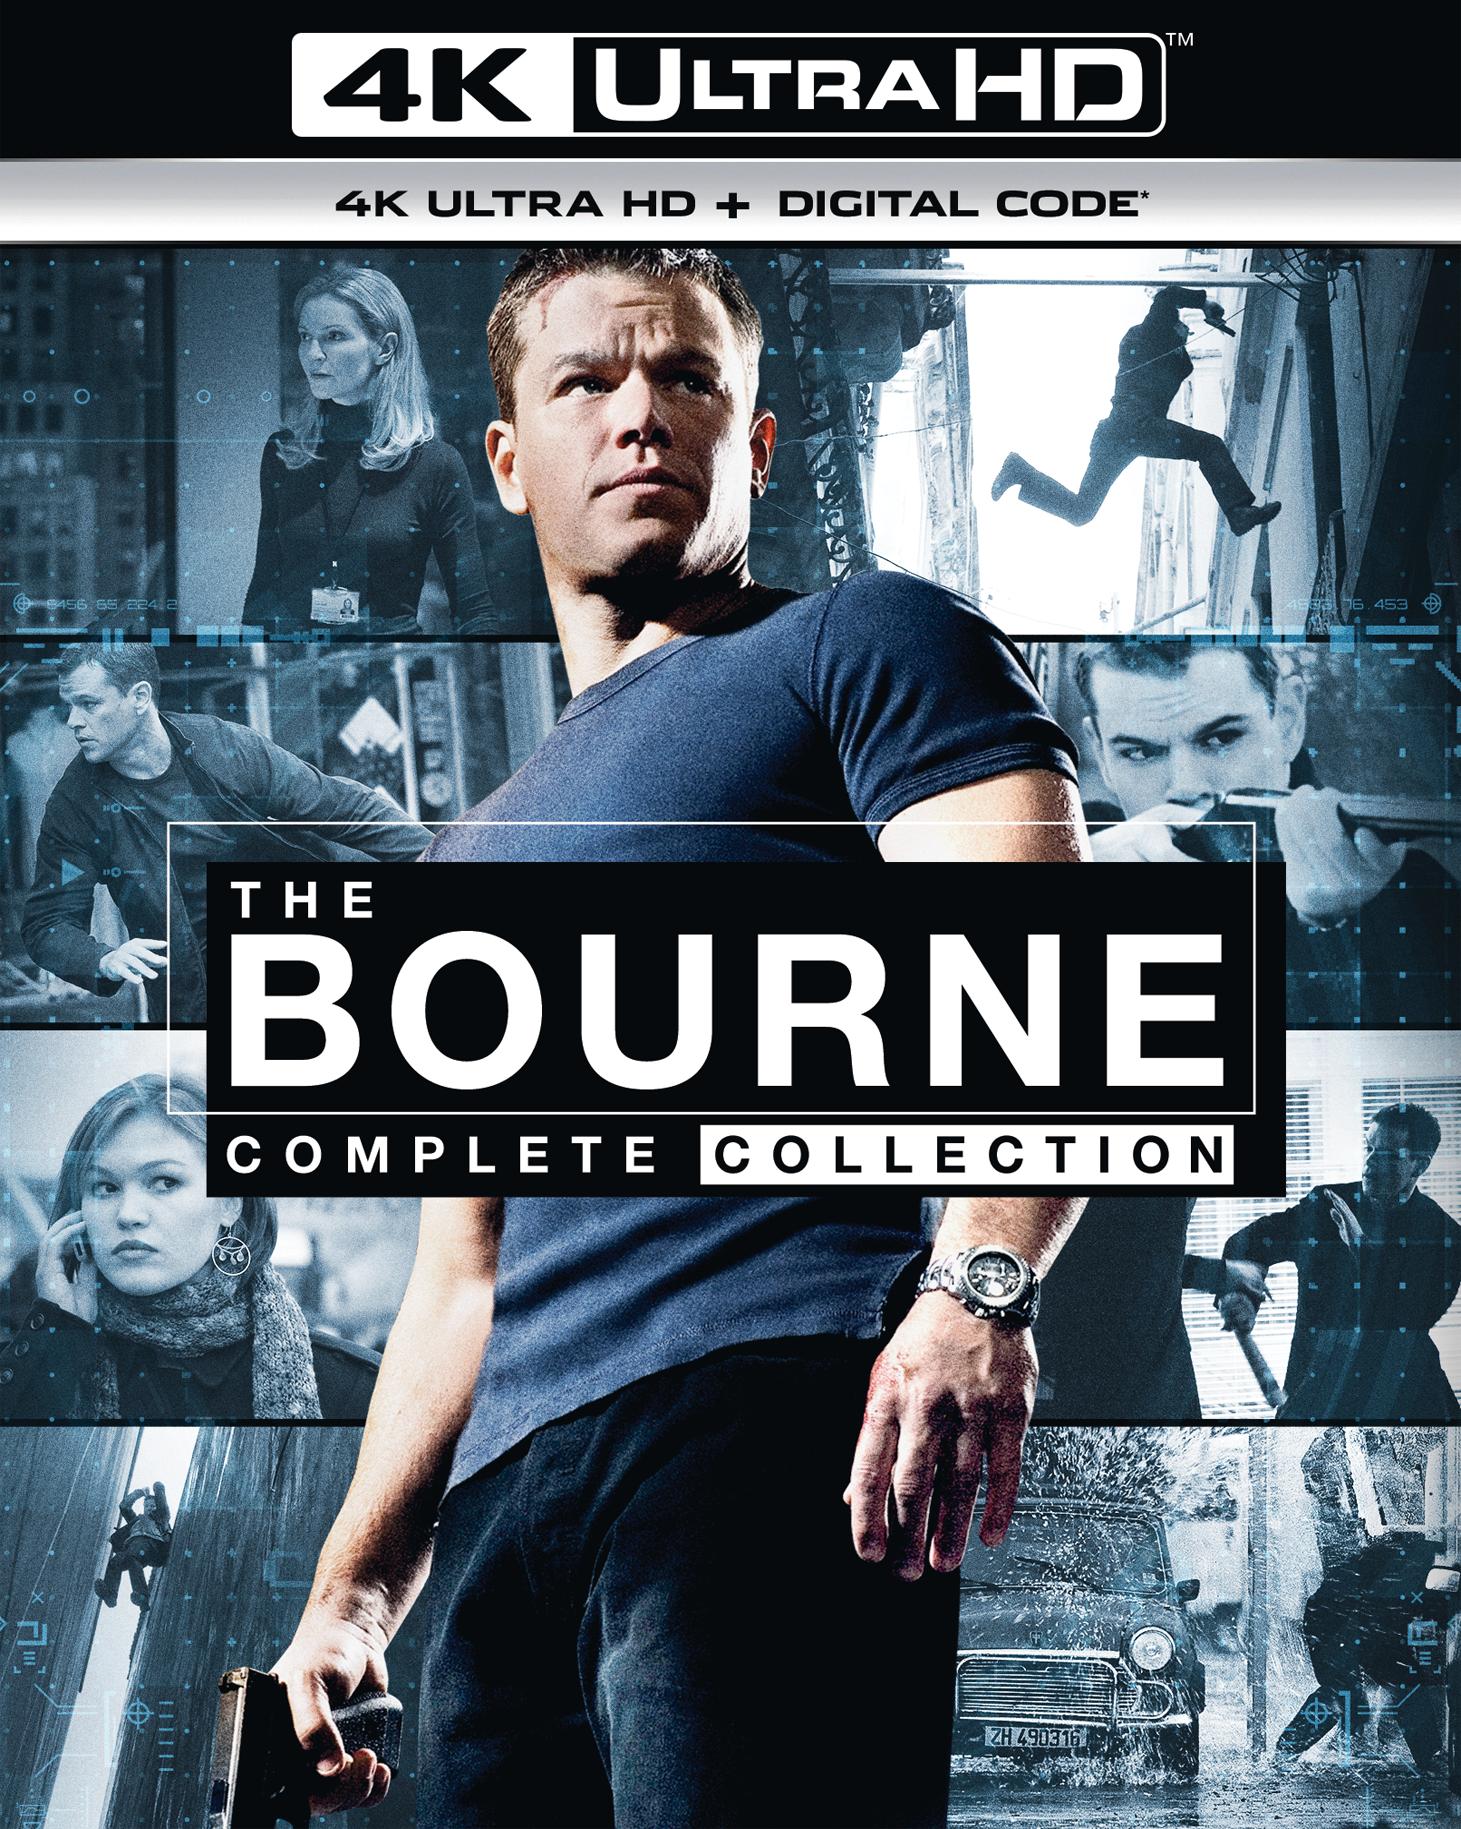 The Bourne Complete Collection (4K UHD + Blu-ray) - UHD [ 2016 ]  - Thriller Movies On 4K Ultra HD Blu-ray - Movies On GRUV